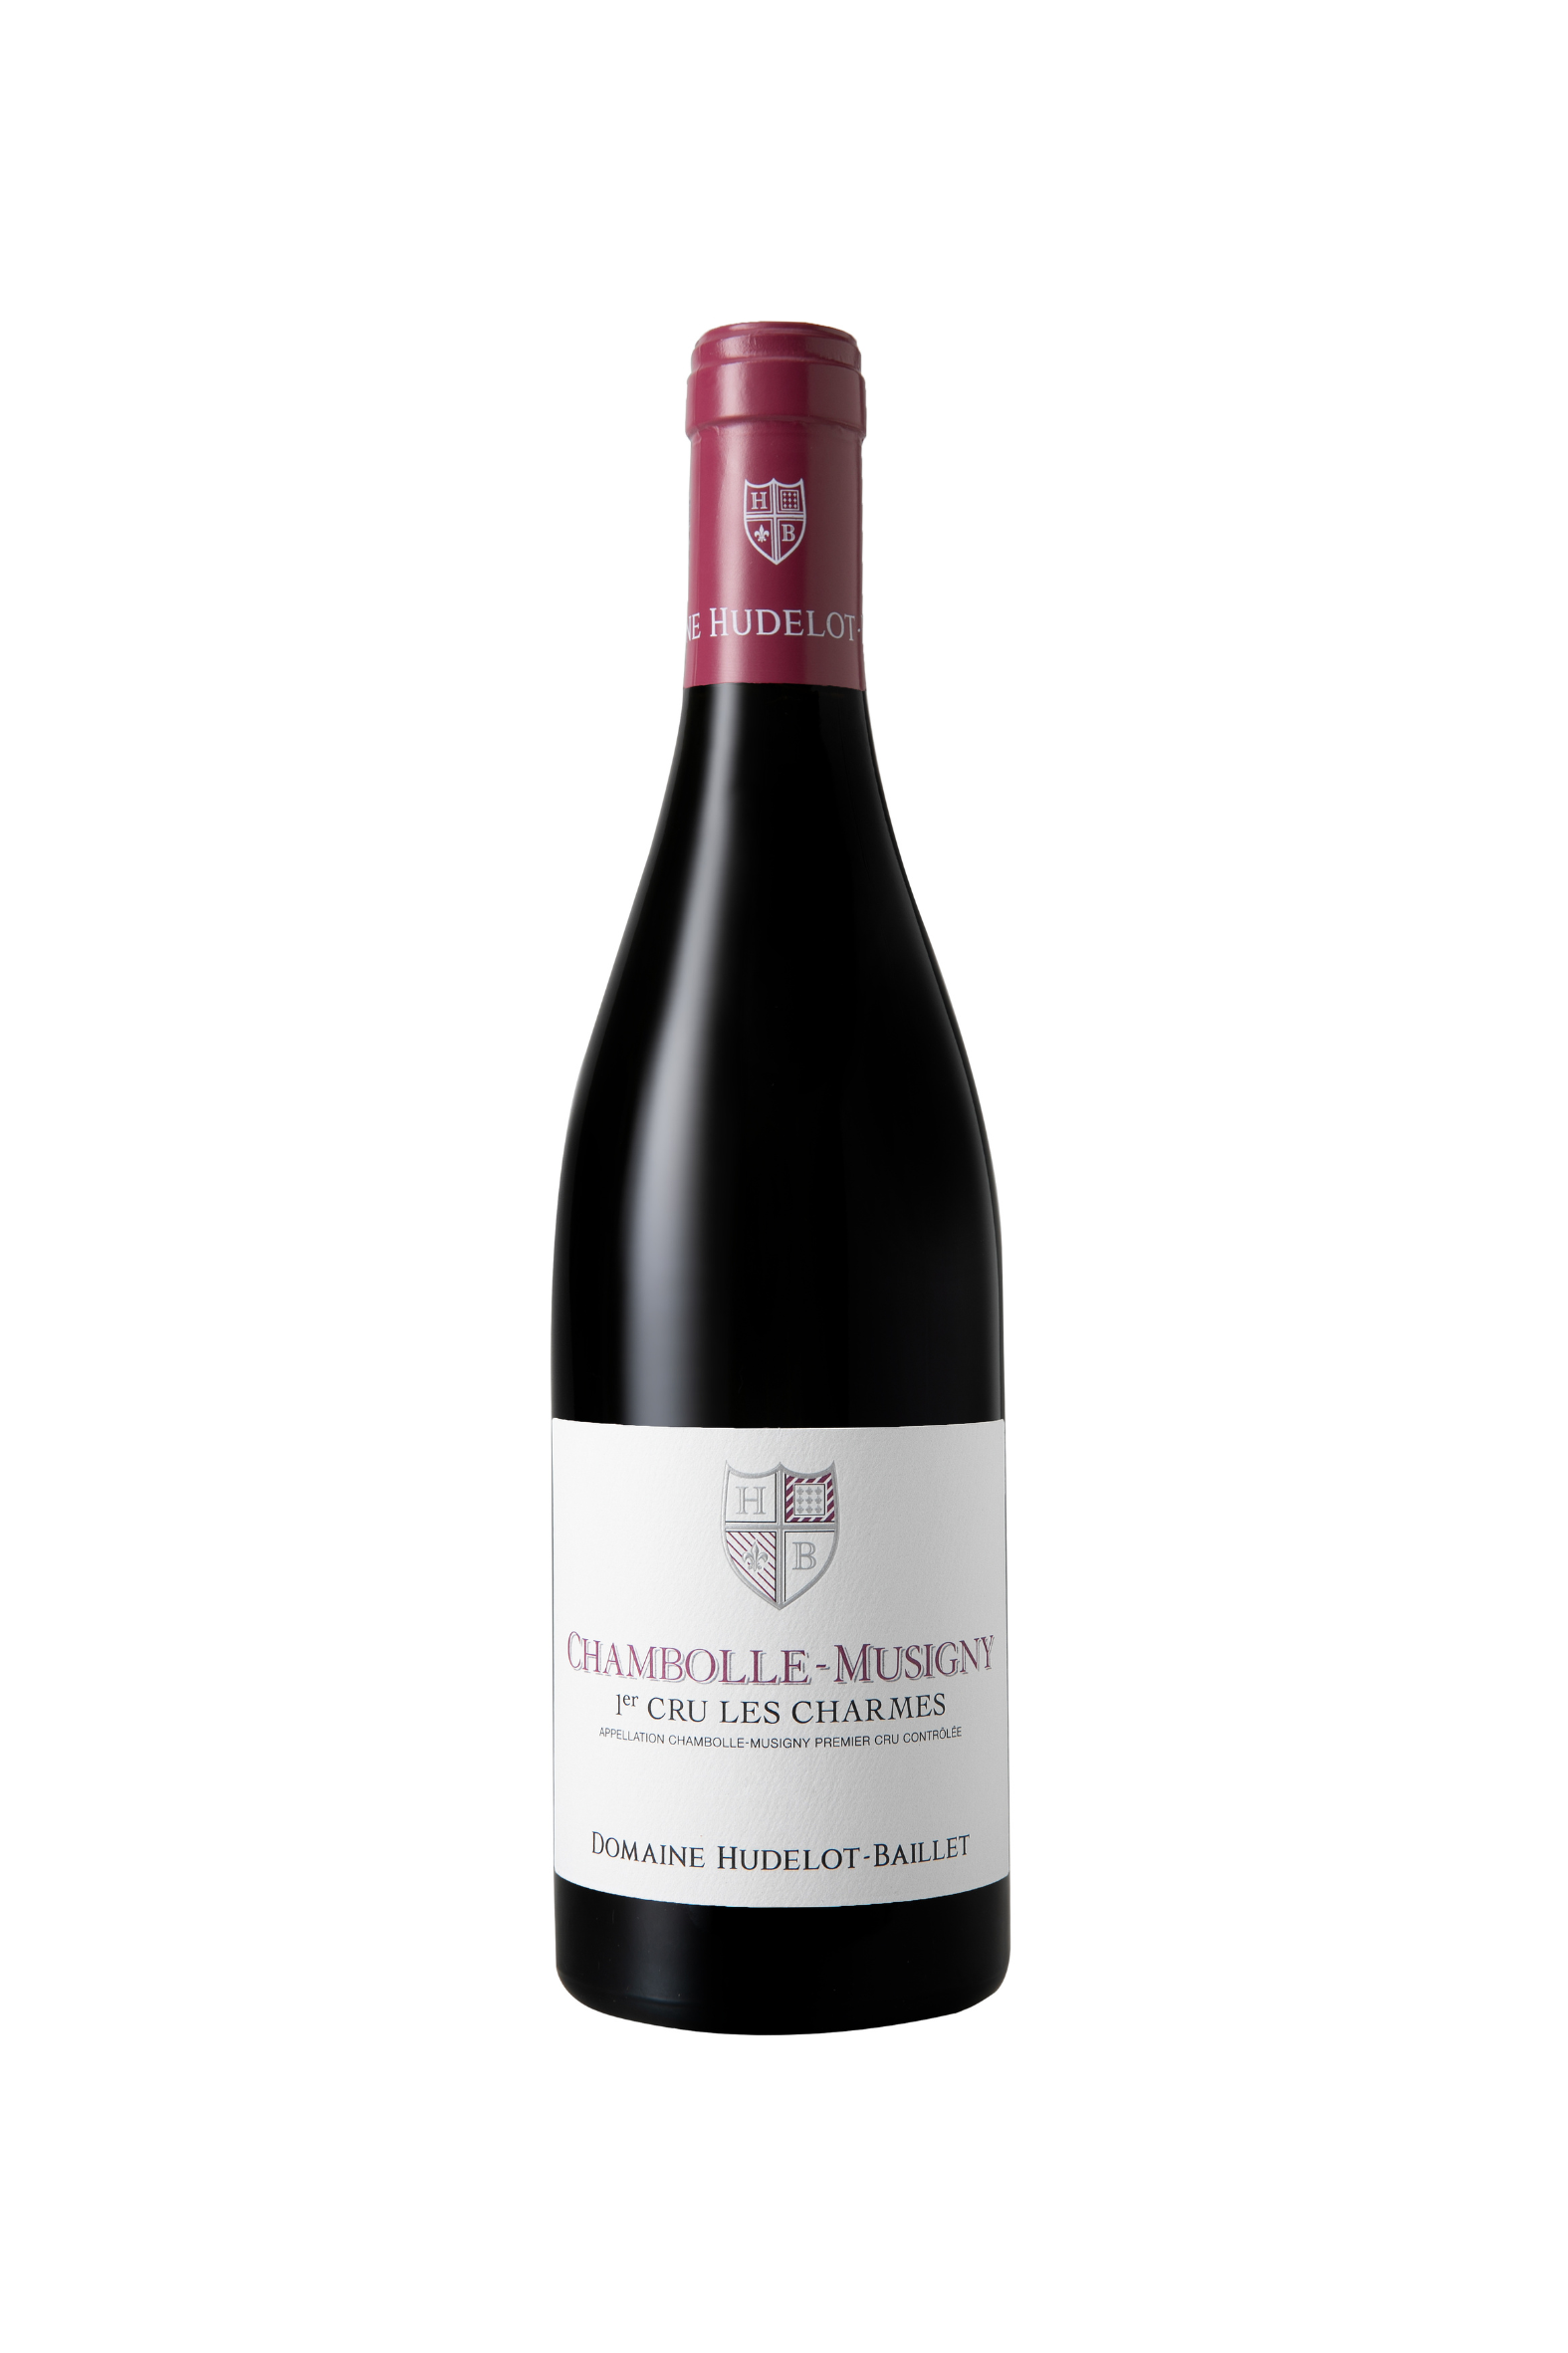 Chambolle-Musigny 1er cru Les Charmes